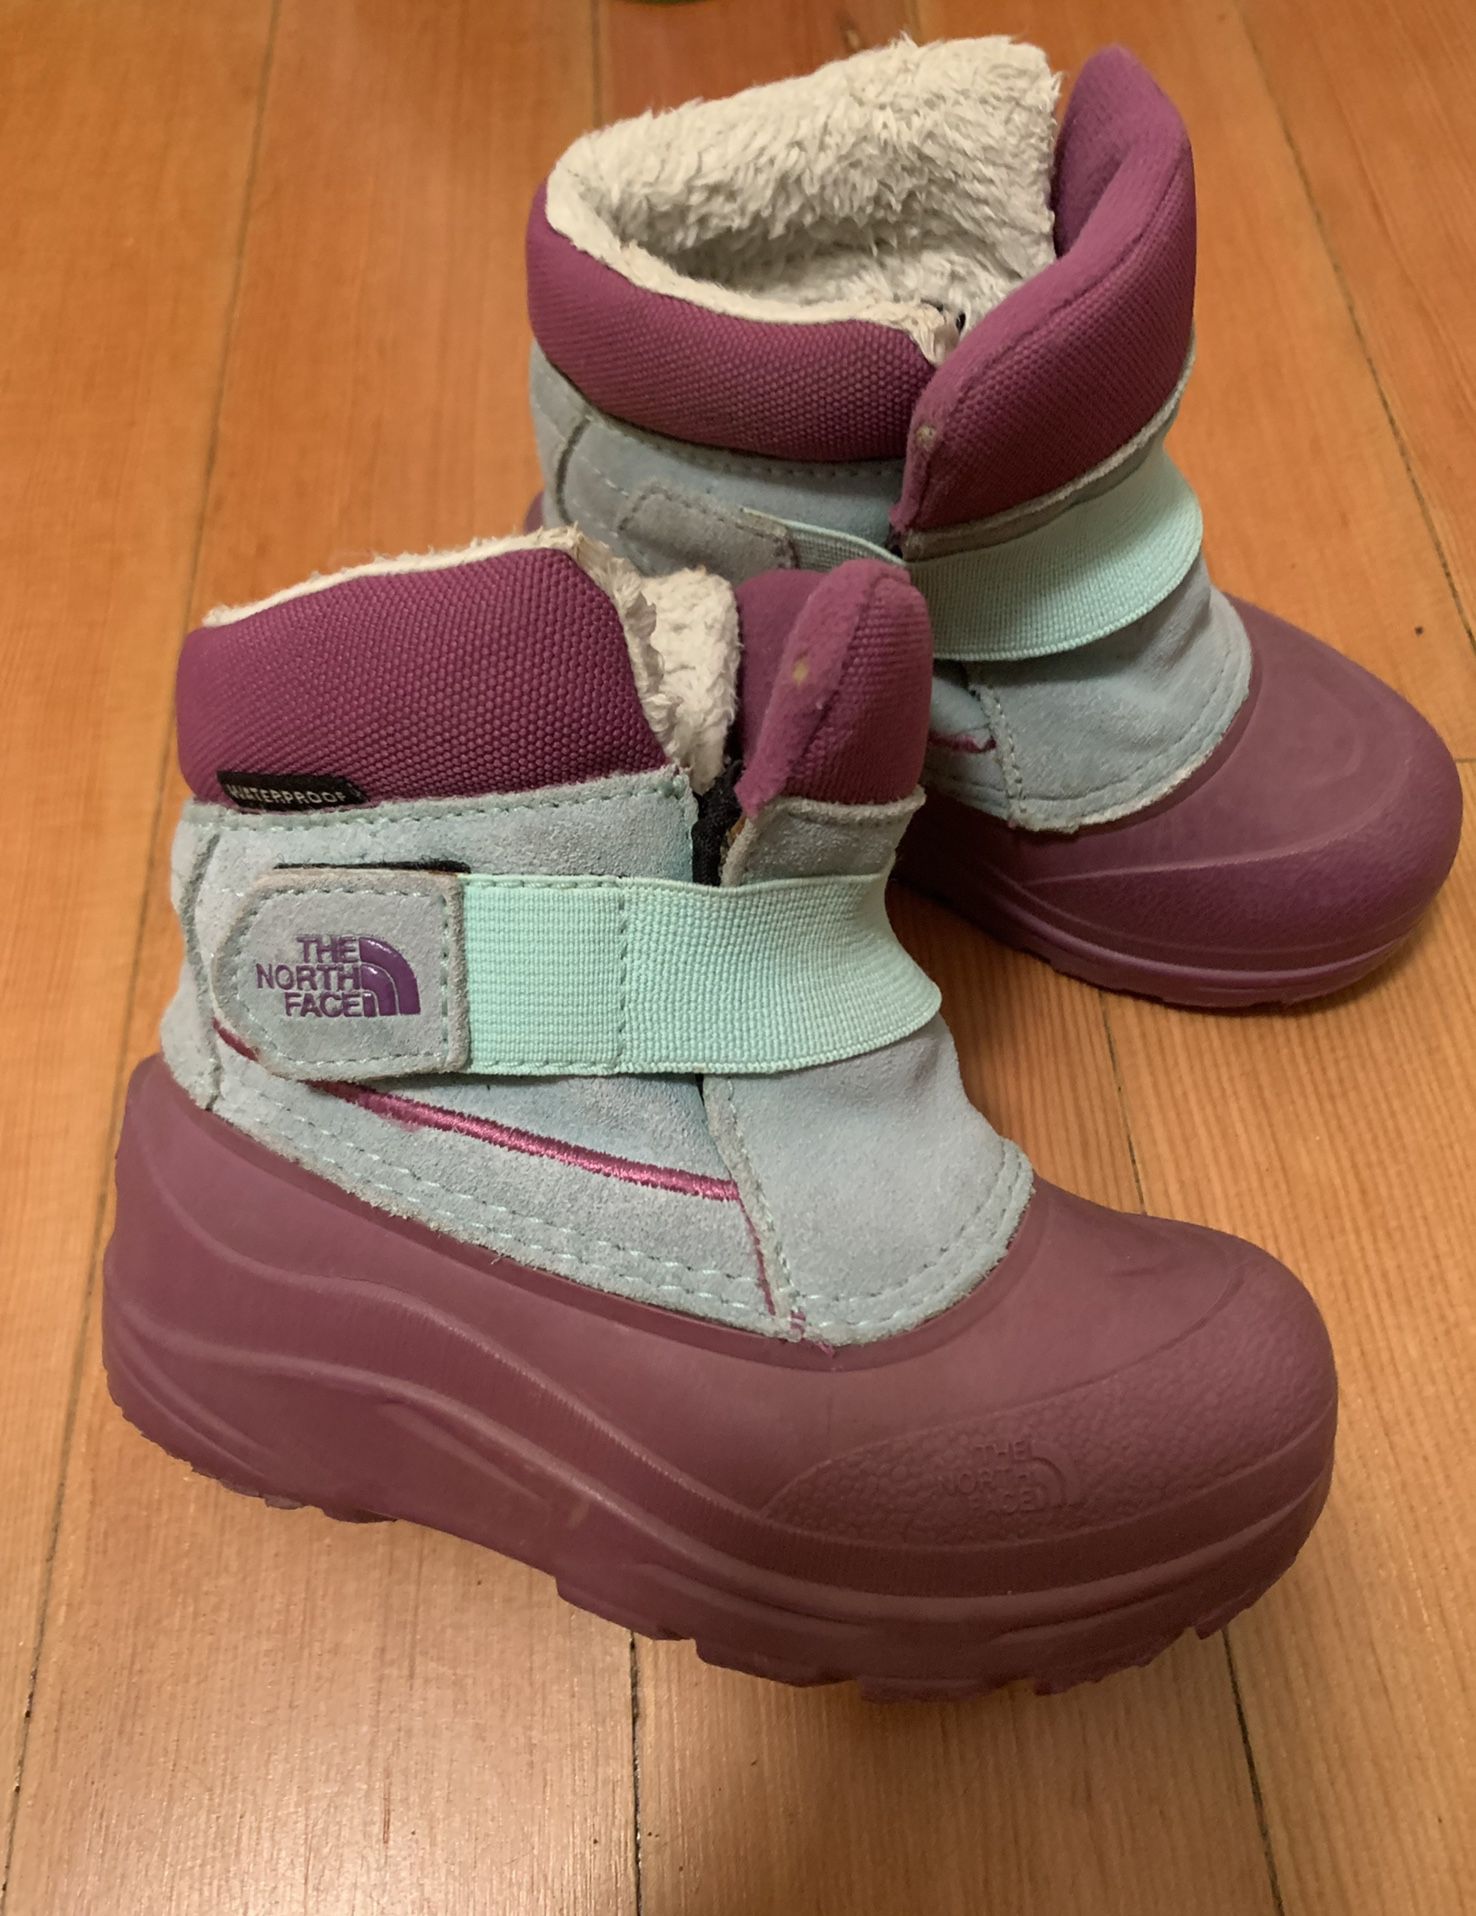 The North Face Snow Boots For Girls/toddlers - Size 9